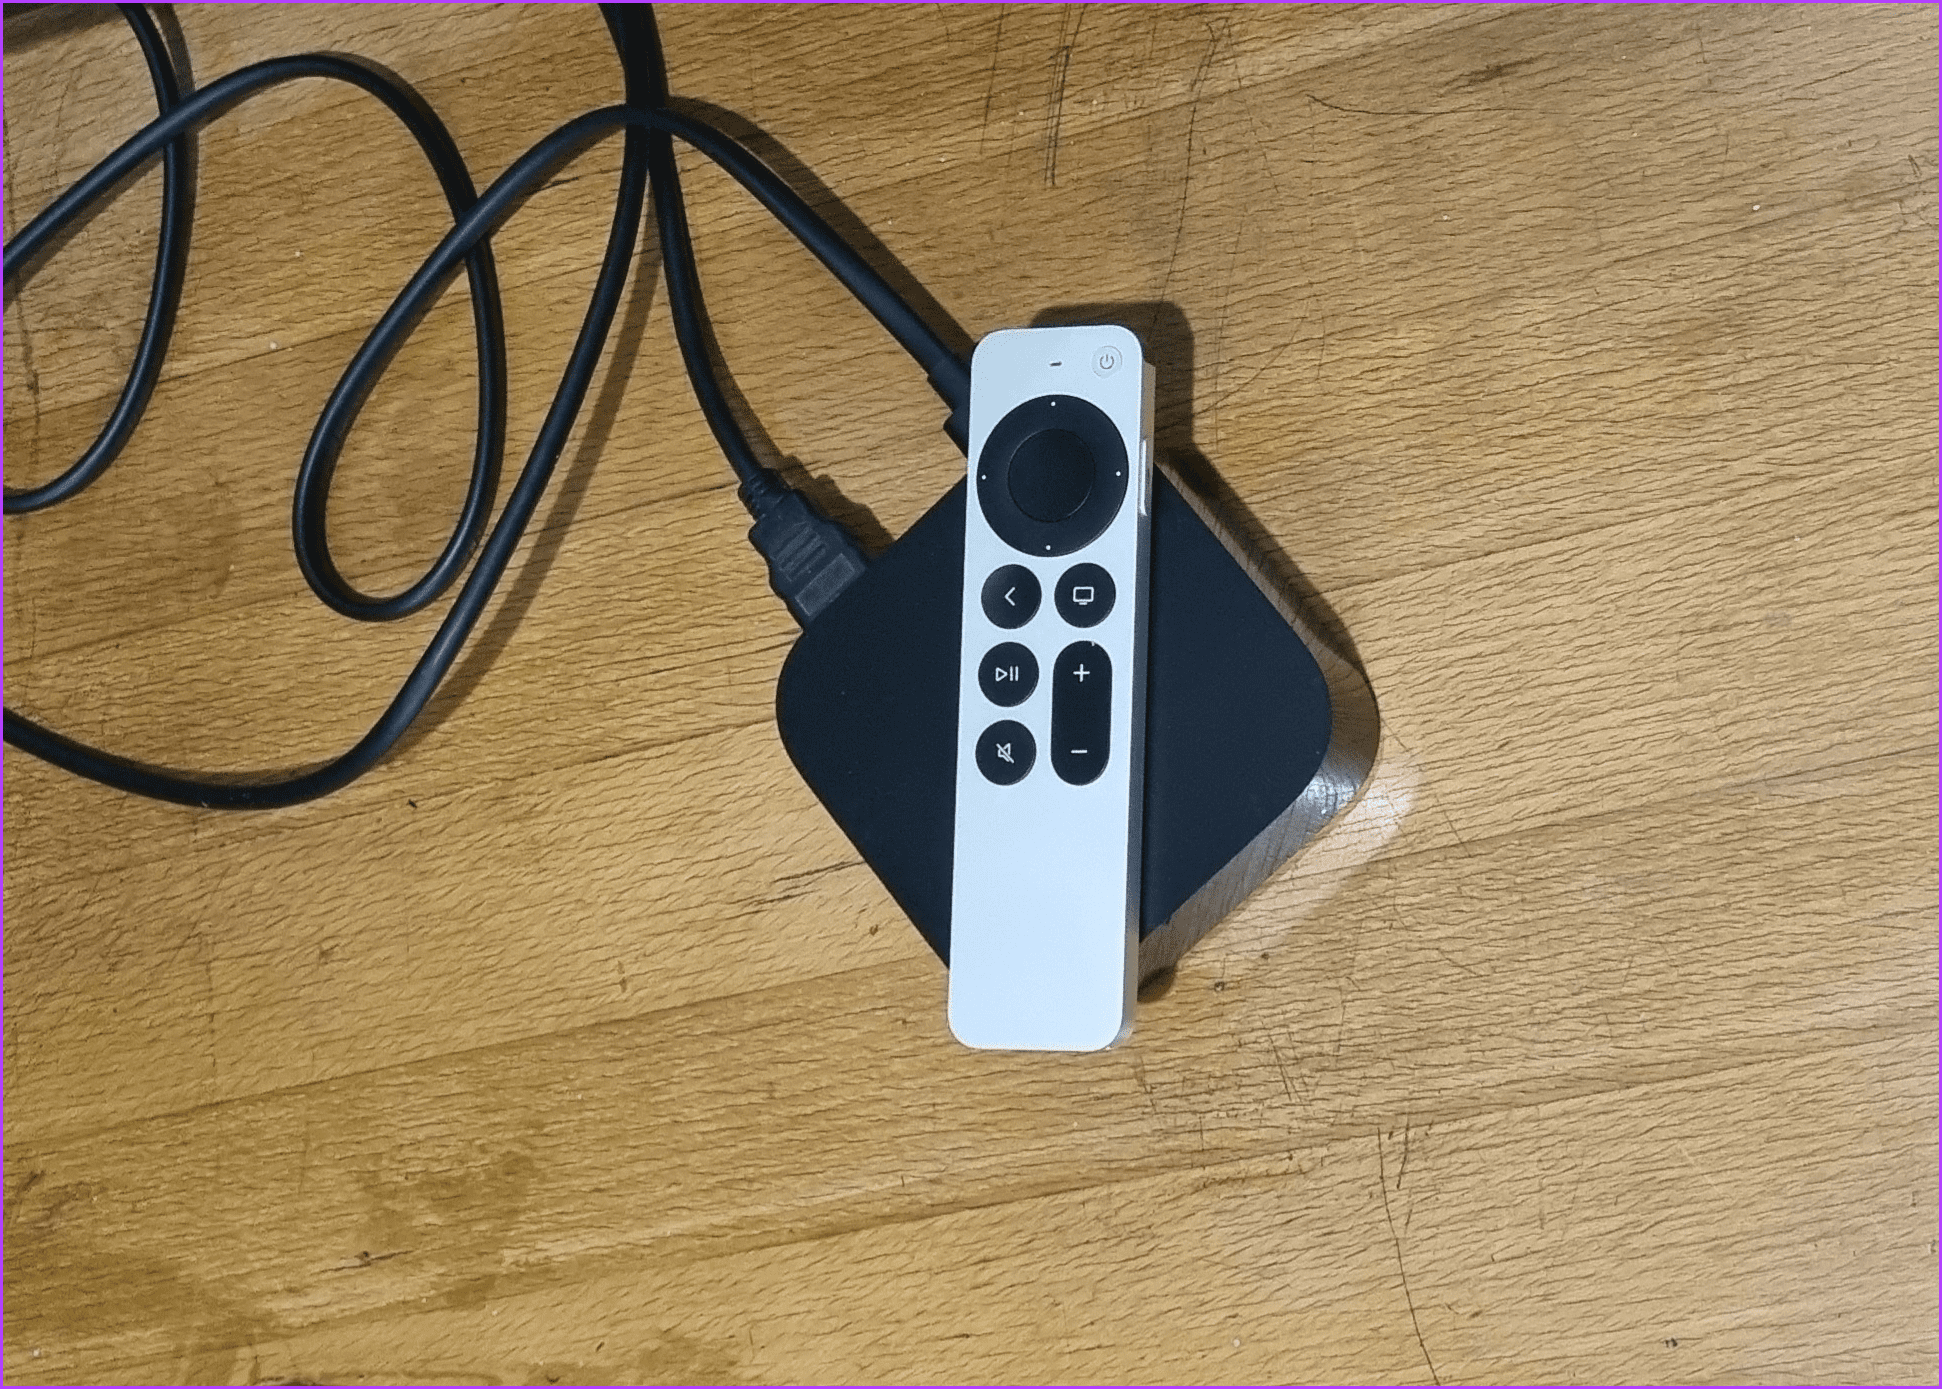 Place remote on Apple TV device